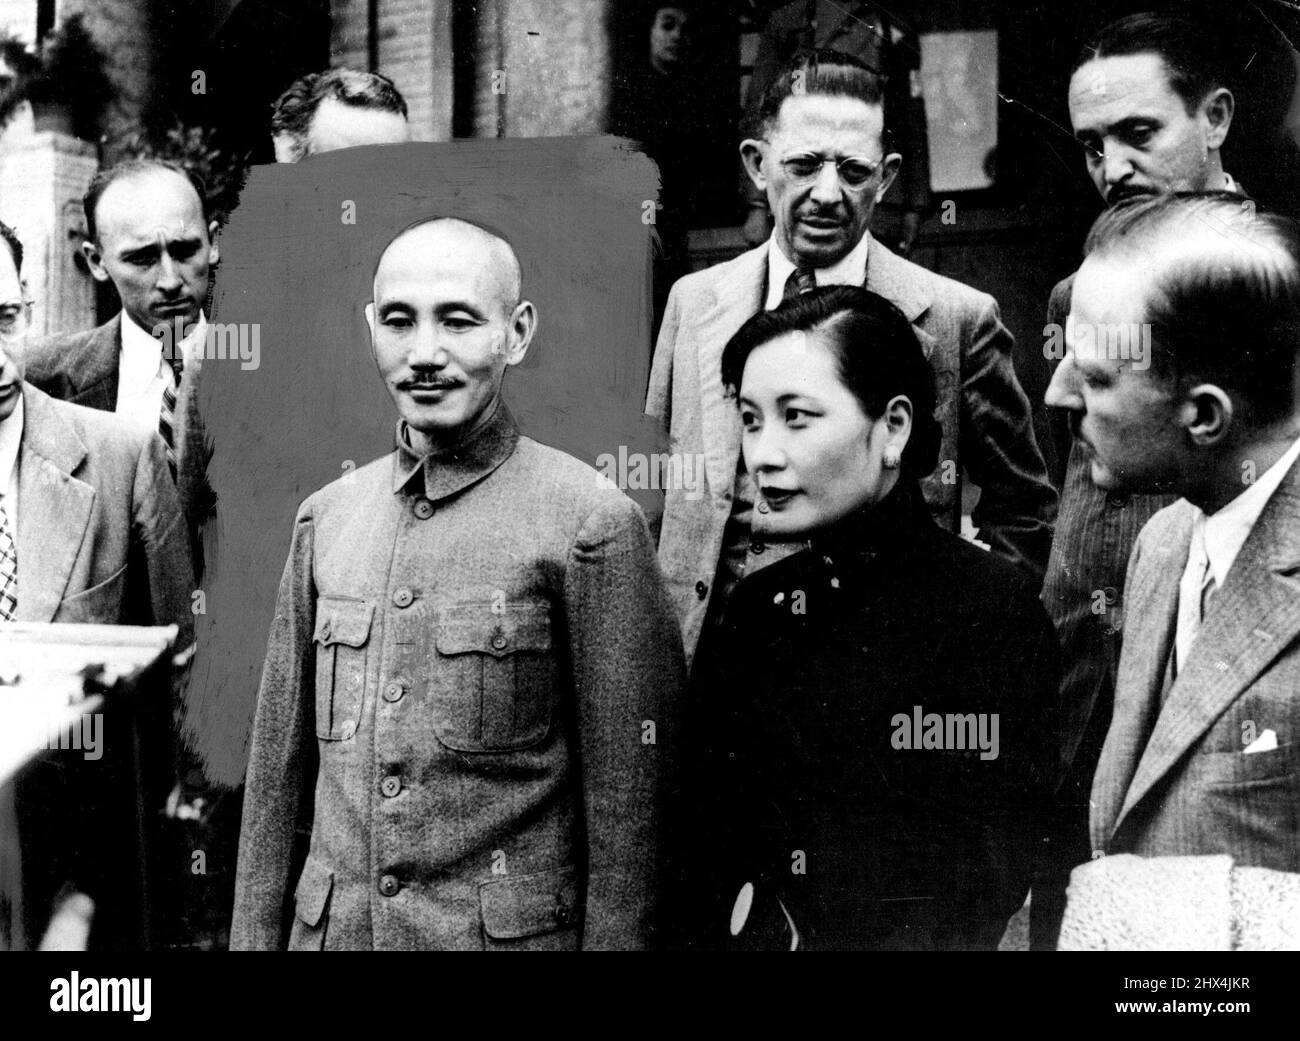 Chain's 'Strong Man' Receives The Press Wife Acts As Interpreter -- General And MME. Chiang Kai-Shek photographed with Journalists after the interview in Nanking. MME. Kai-Shek is here seen to be a pretty woman, on her high collar she *****. MME. Chiang Kai-Shek, who holds as much power in China as her famous husband, General Chiang Kai-Shek, acts as interpreter when the press are interviewed. All these interviews are held in secret plades, as are other meetings of importance, ***** of their important position for ***** . November 10, 1937. (Photo by Keystone) Stock Photo